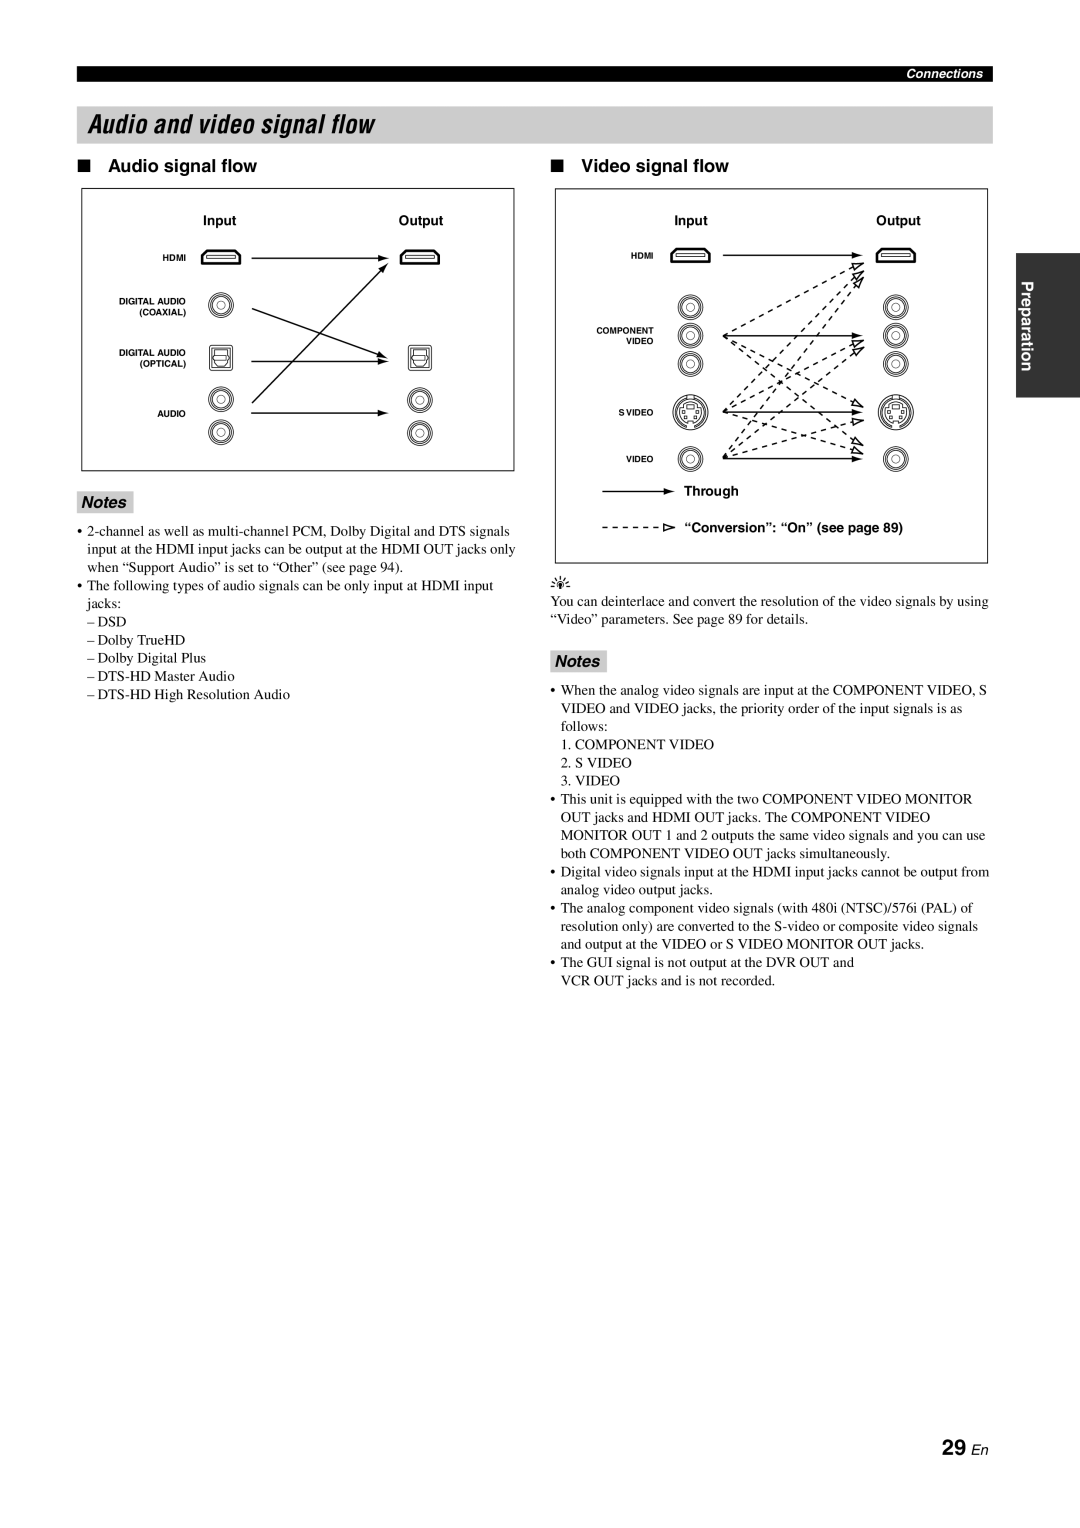 Yamaha DSP-Z11 owner manual Audio and video signal flow, 29 En, Audio signal flow, Video signal flow, Notes, Preparation 